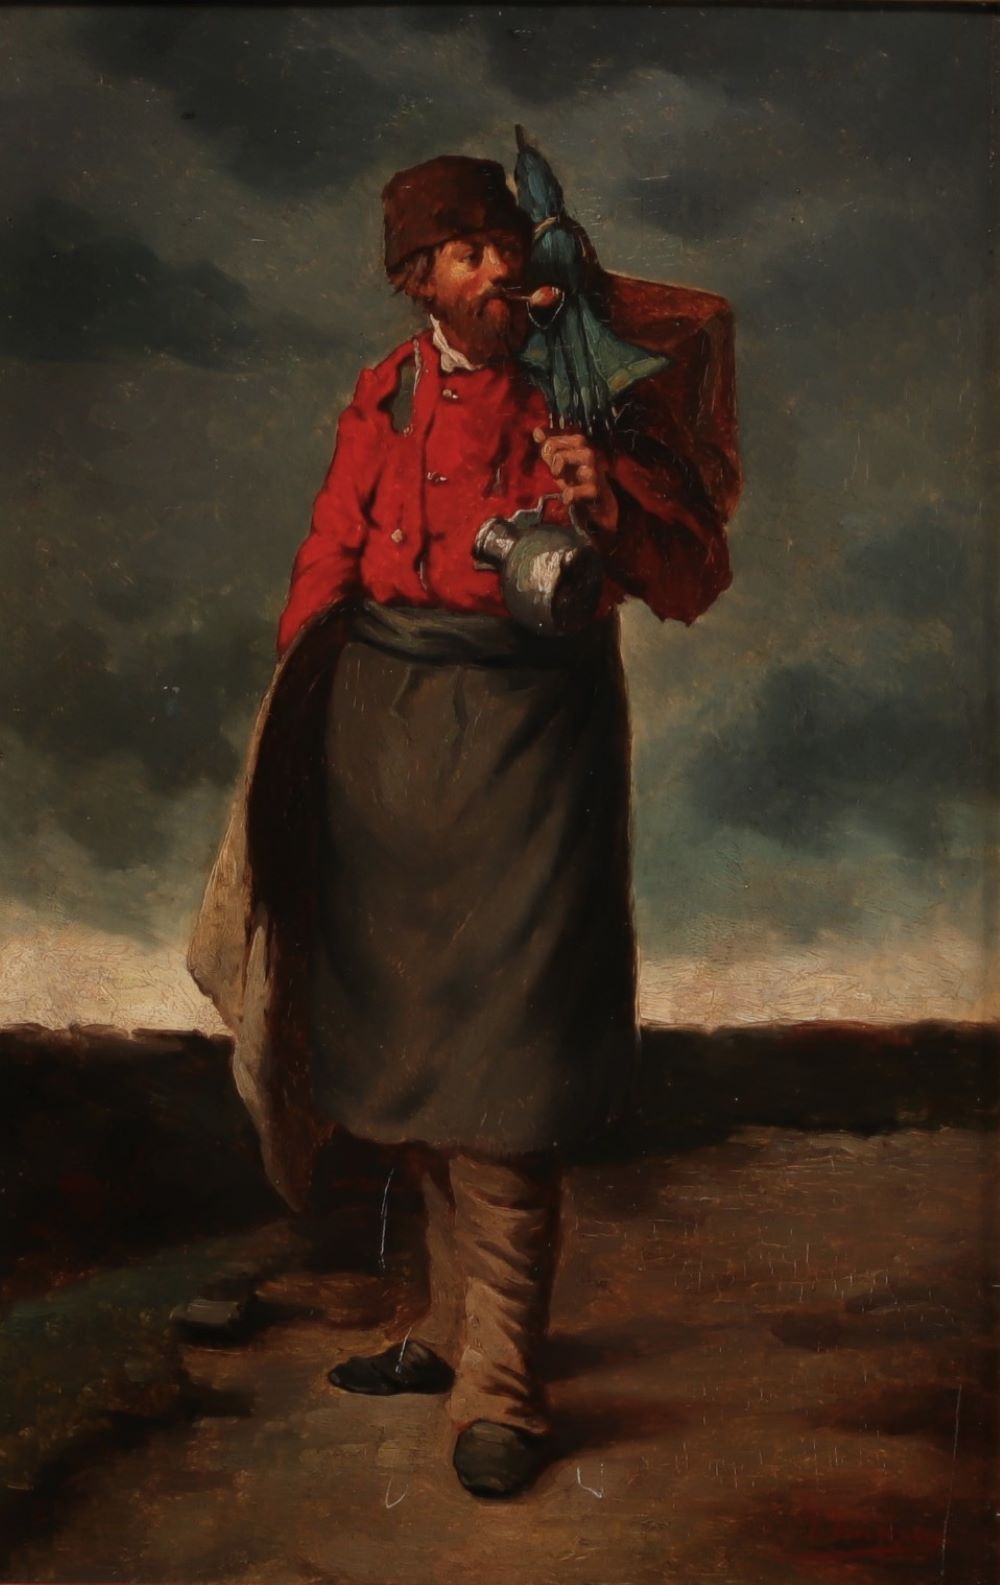 Josse IMPENS (1840-1905) "Soldier in the field" Oil on panel, 19th century.